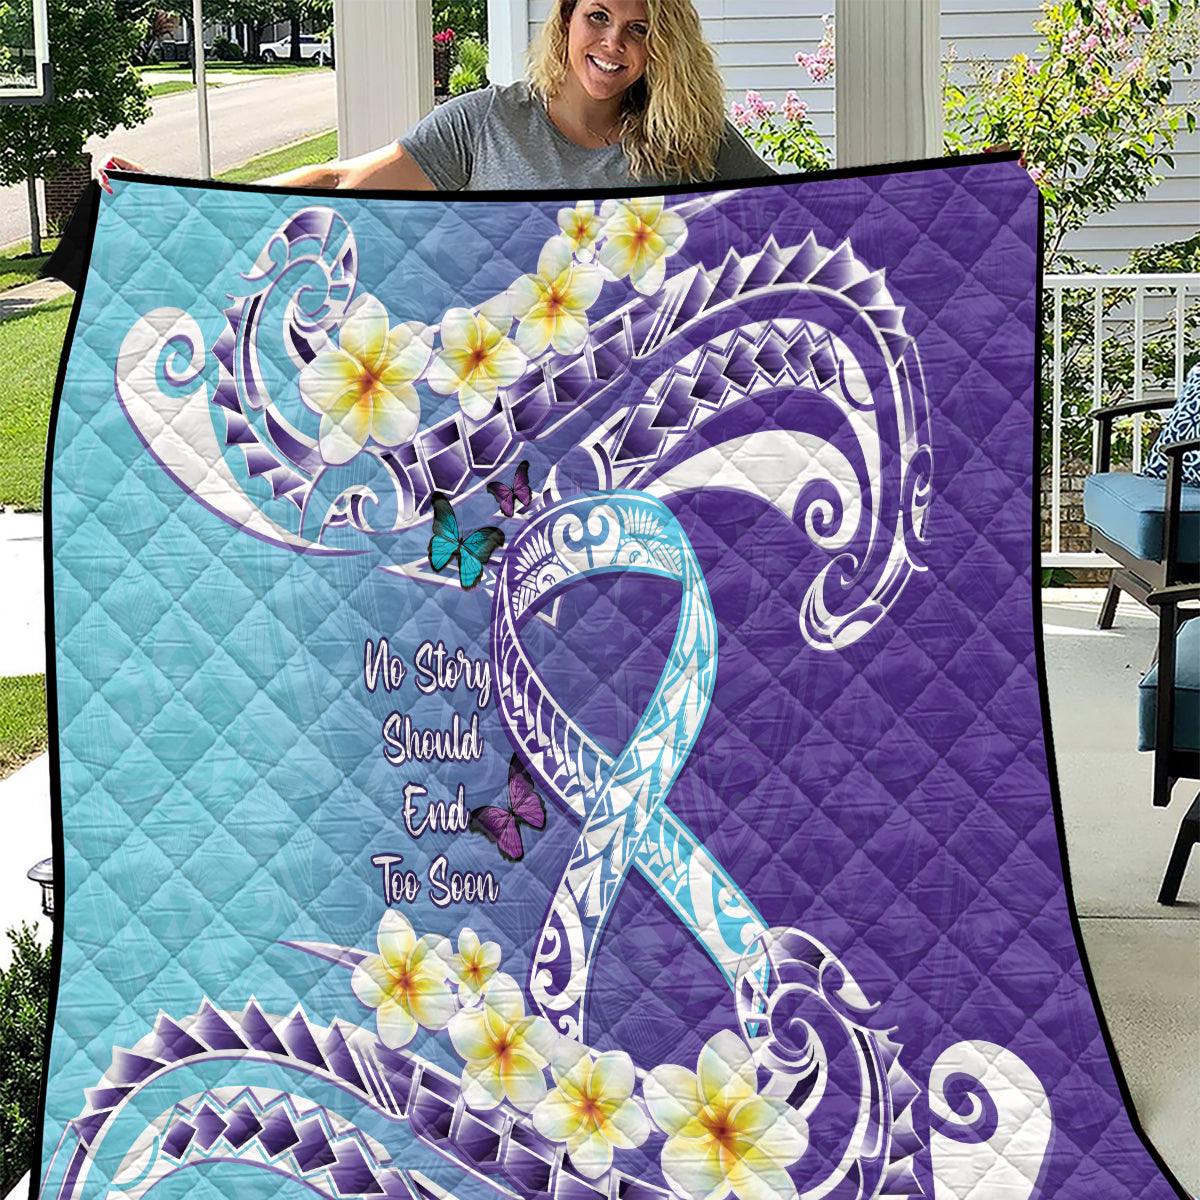 No Story Should End Too Soon Suicide Awareness Quilt Purple And Teal Polynesian Ribbon